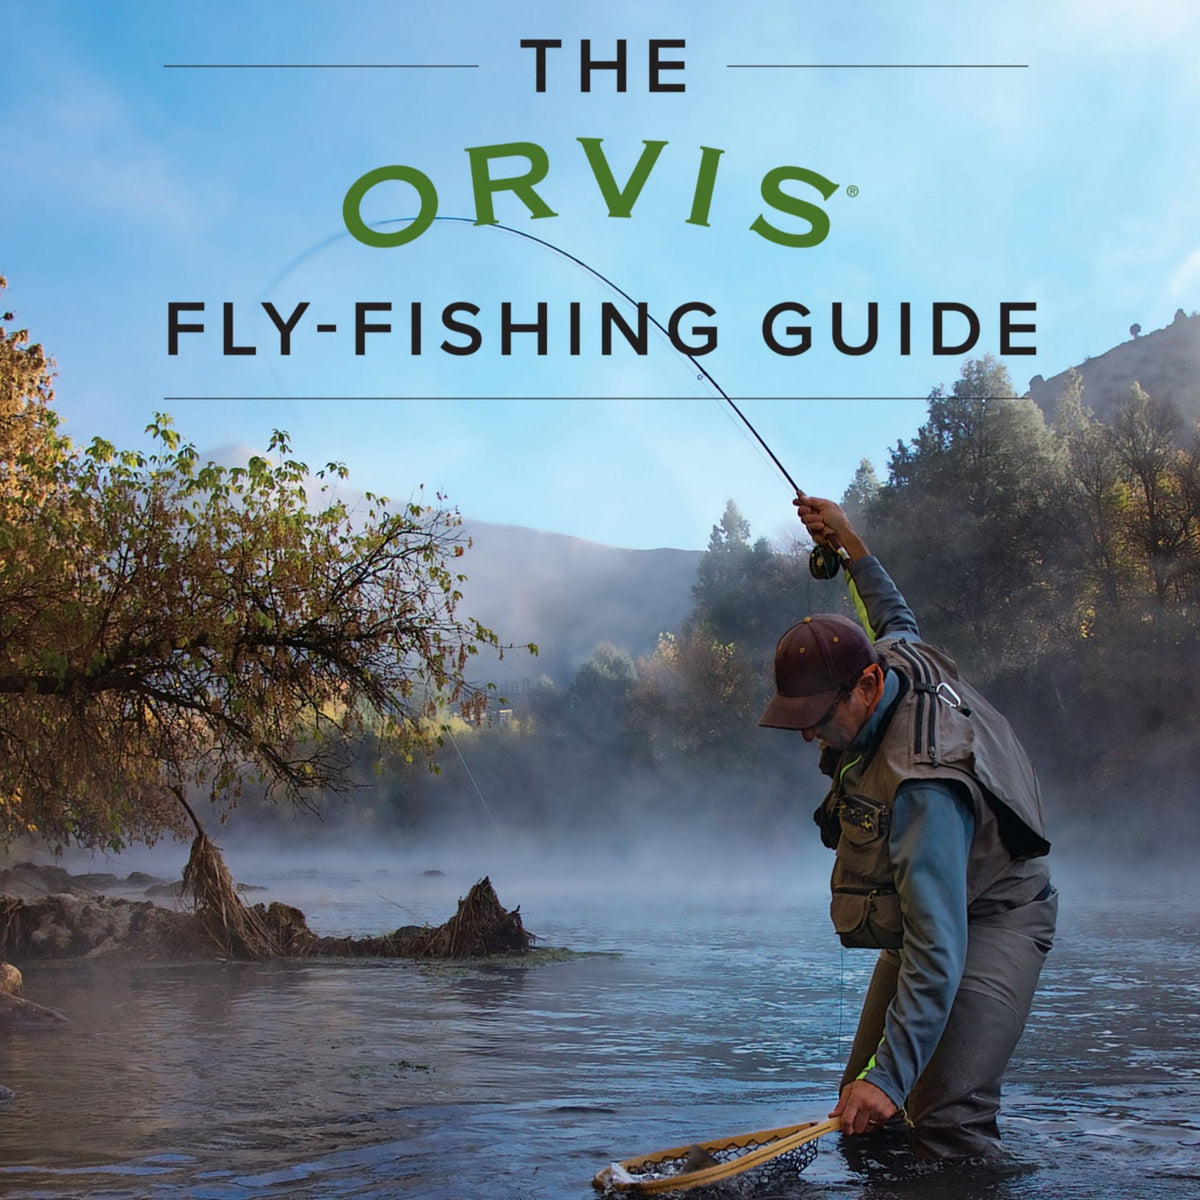 The Orvis Fly-Fishing Guide by Tom Rosenbauer – Fish Tales Fly Shop